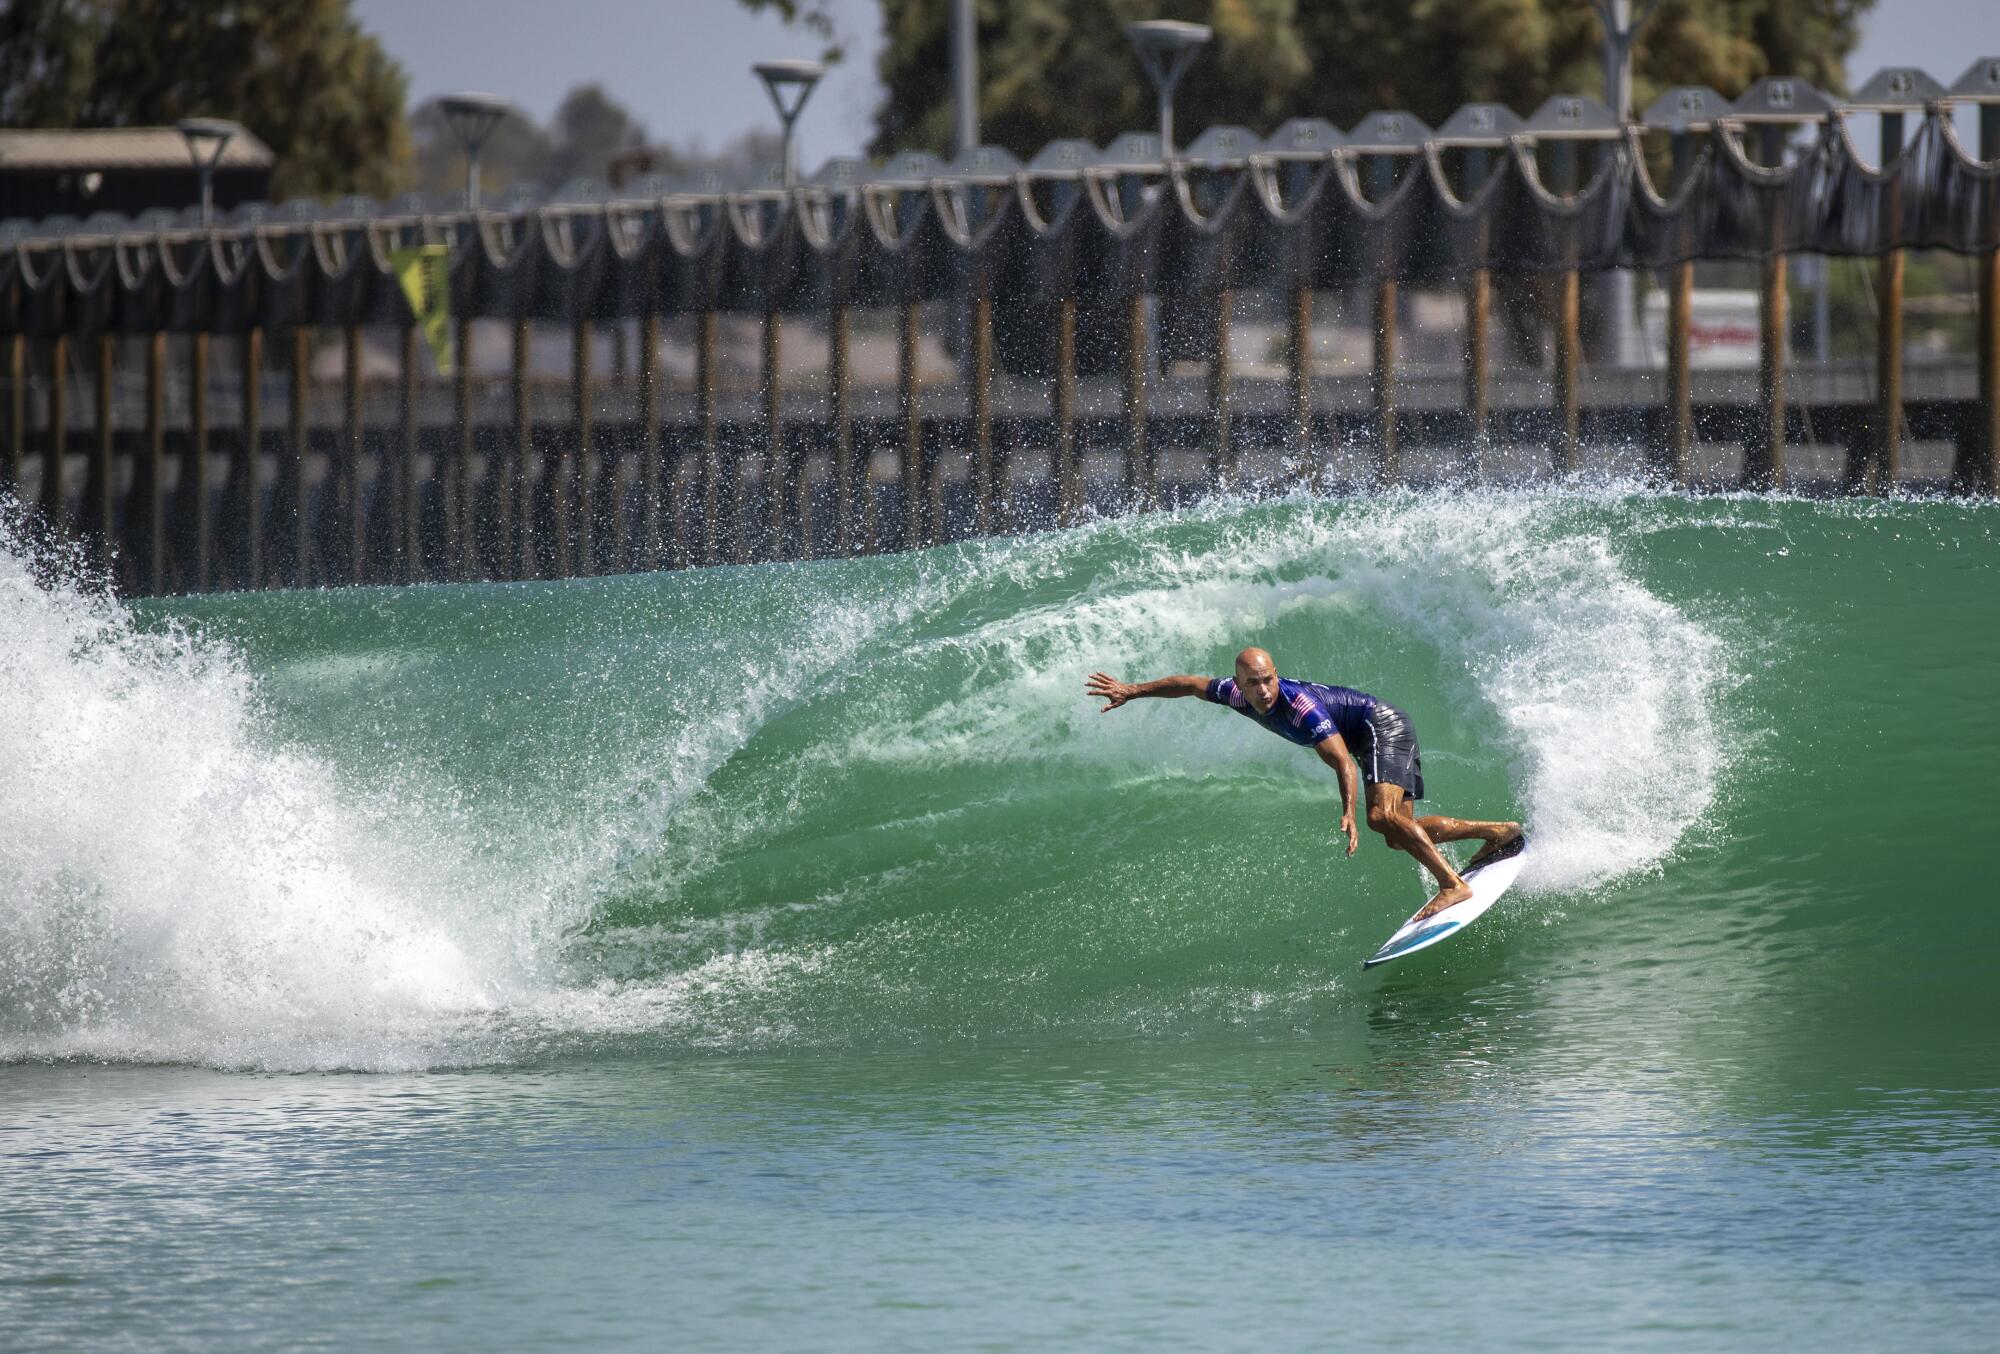 Surf Ranch innovator and 11-time world champion surfer Kelly Slater, of Florida, does a slashing turn off a wave.